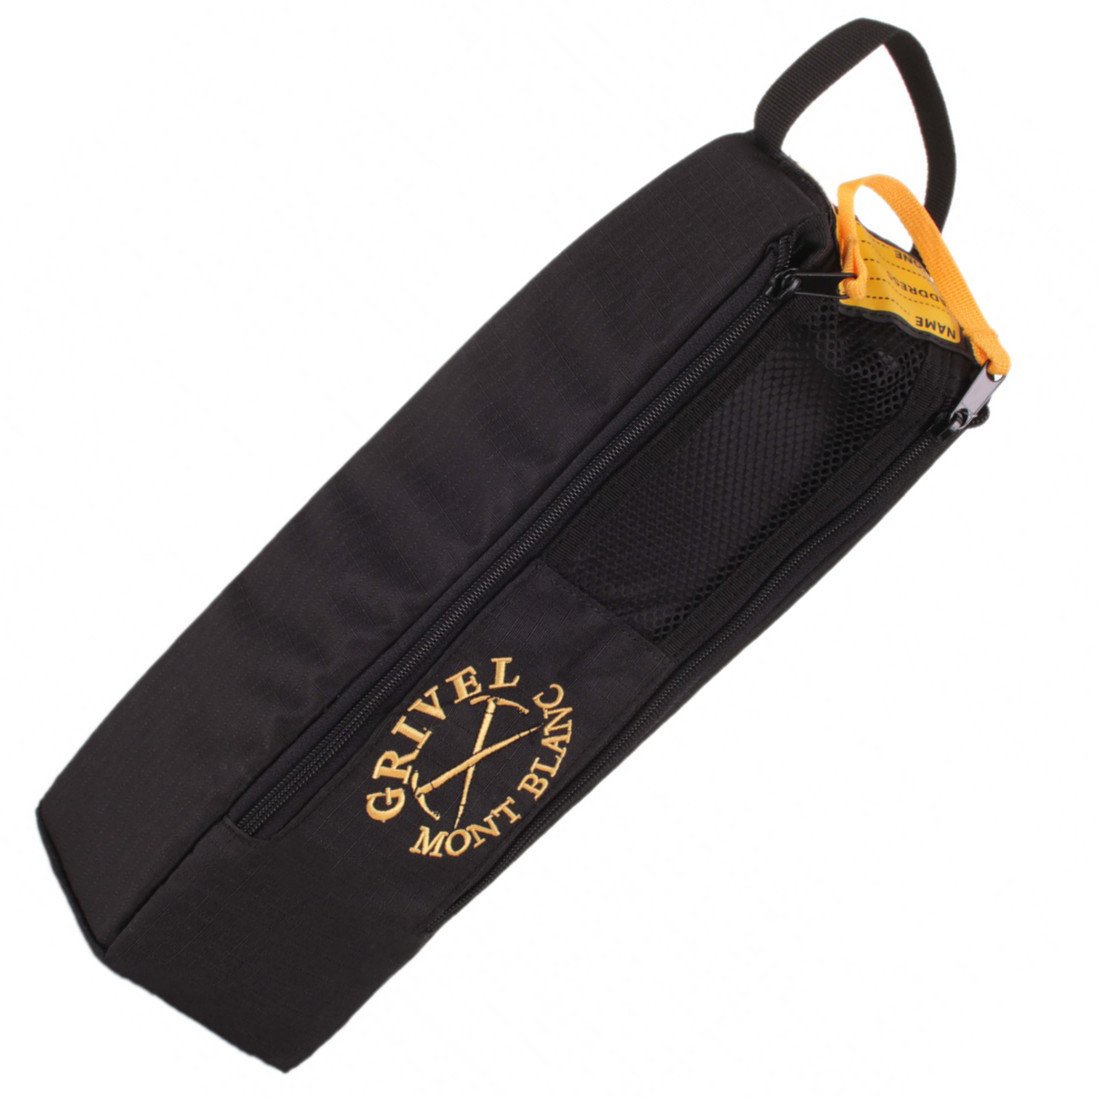 Grivel Crampon Safe bag, front/side view in black and yellow colours